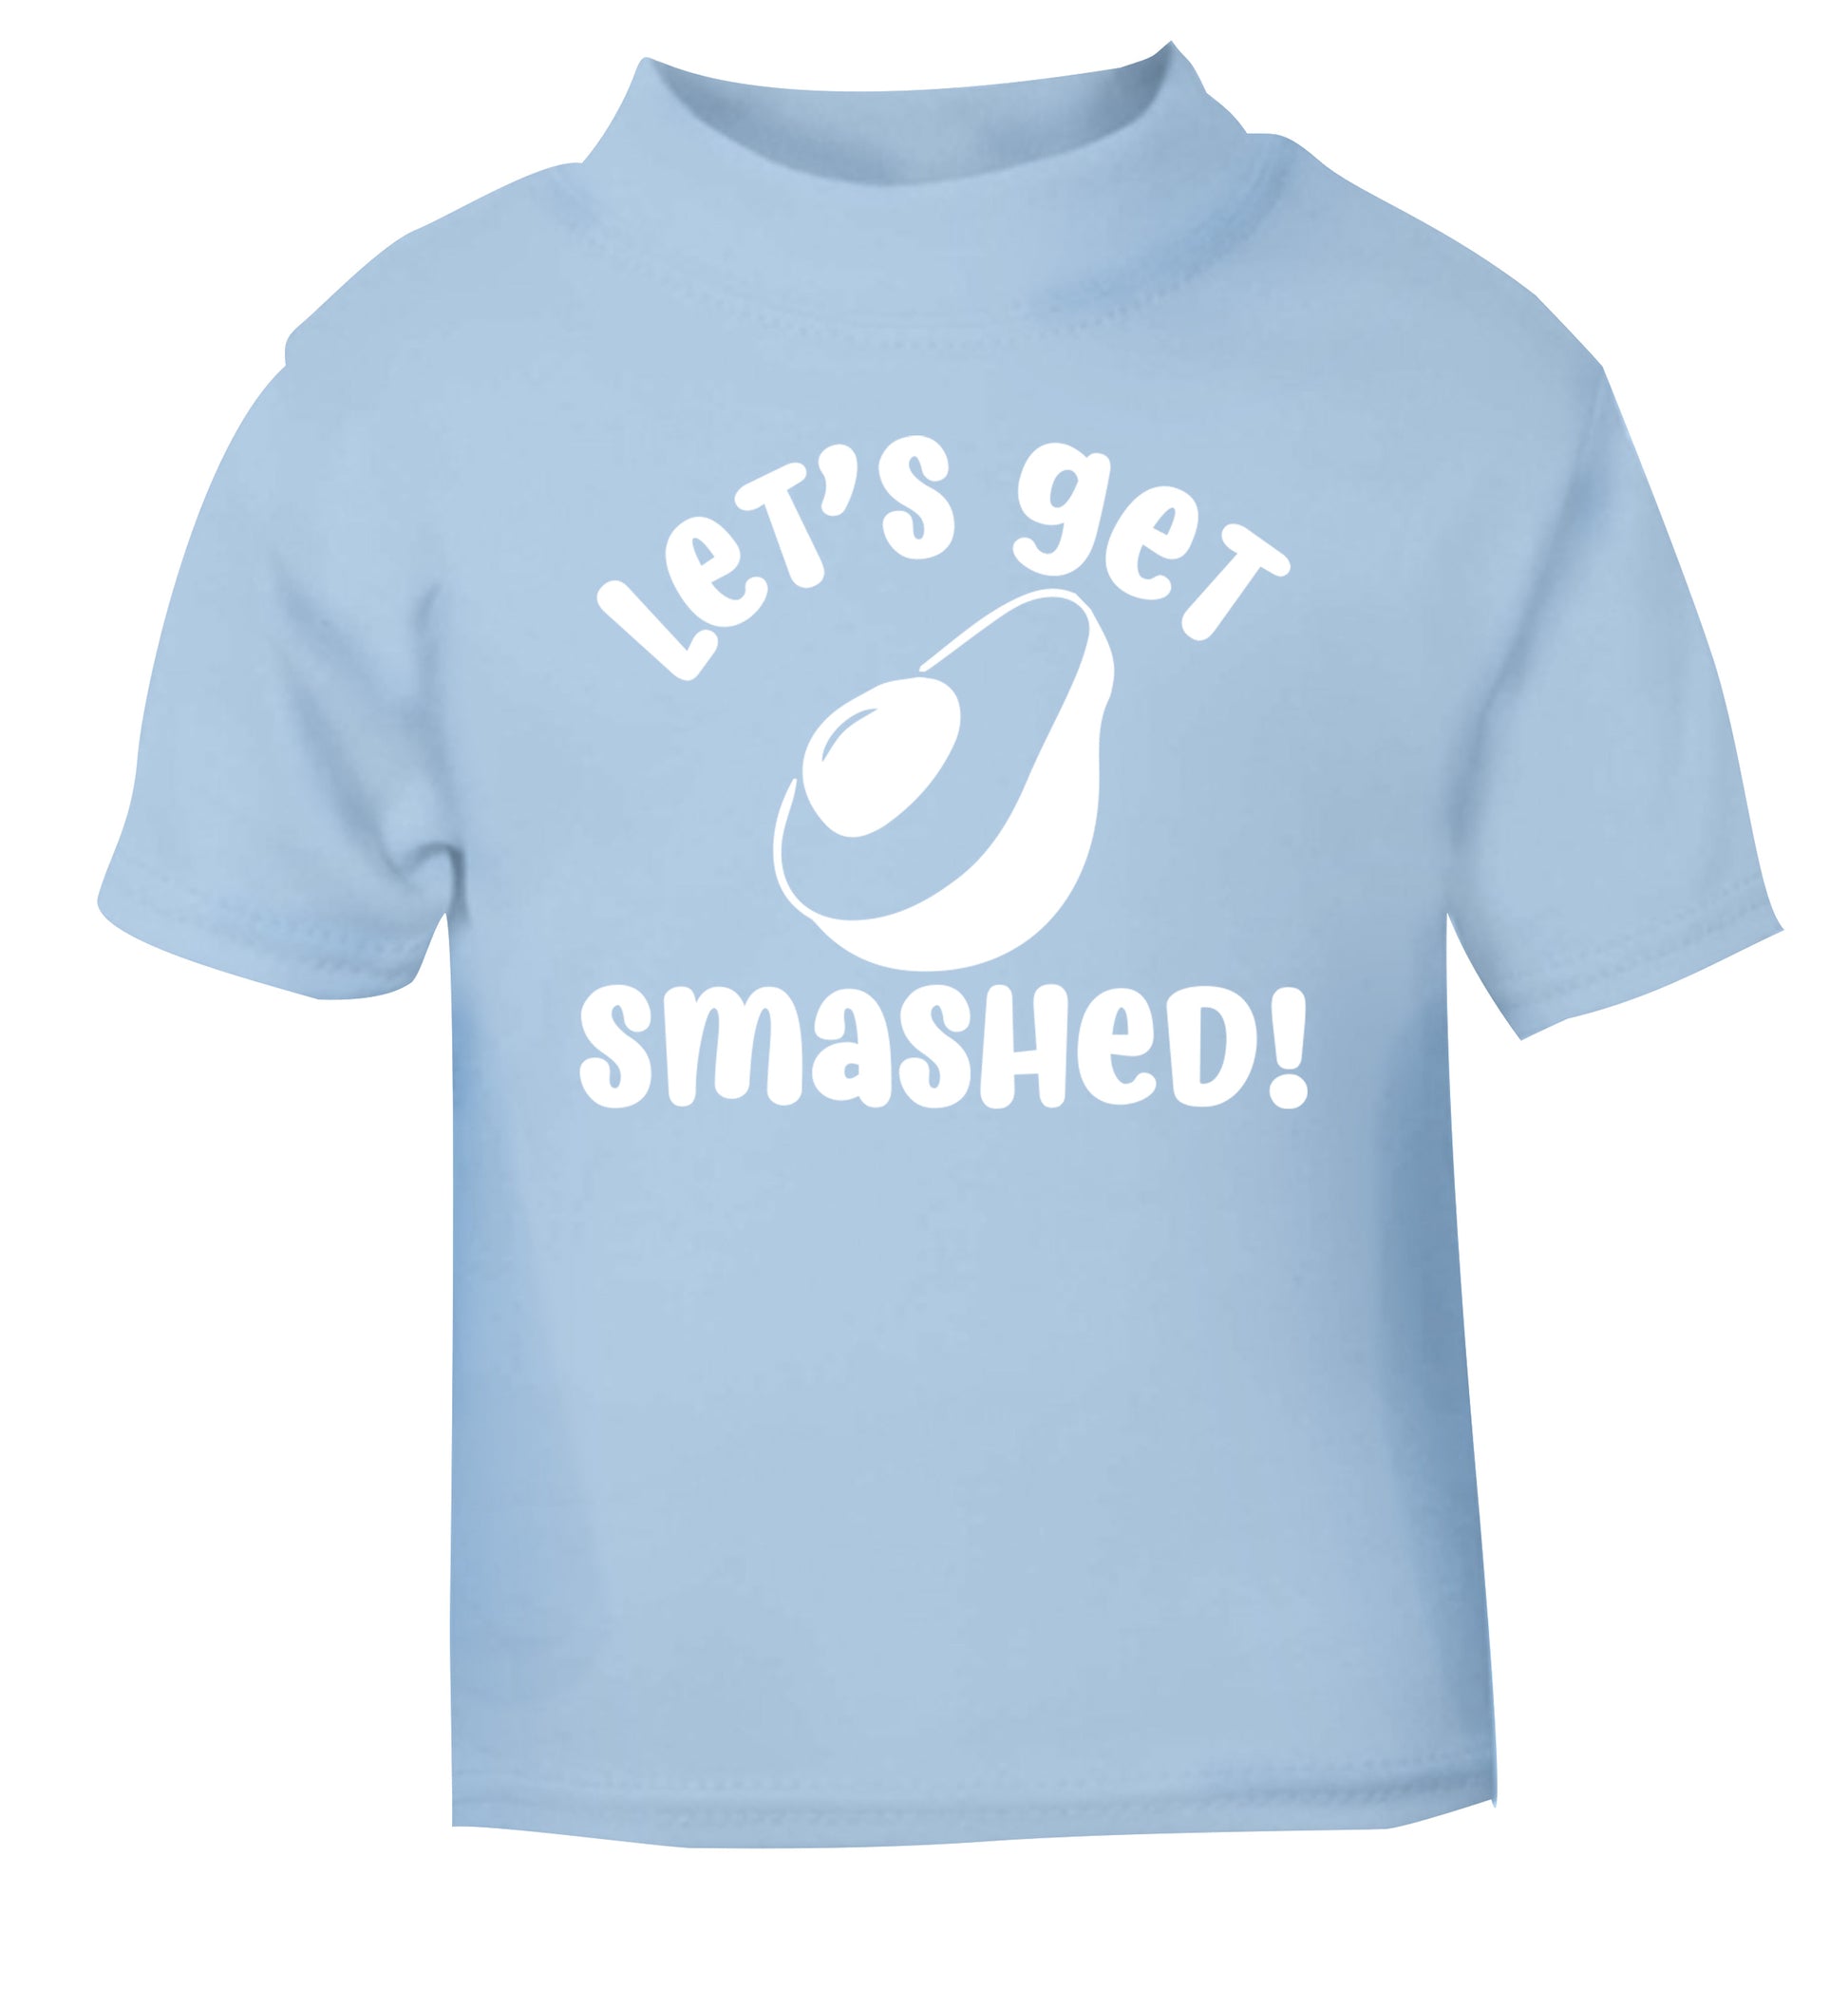 Let's get smashed light blue Baby Toddler Tshirt 2 Years